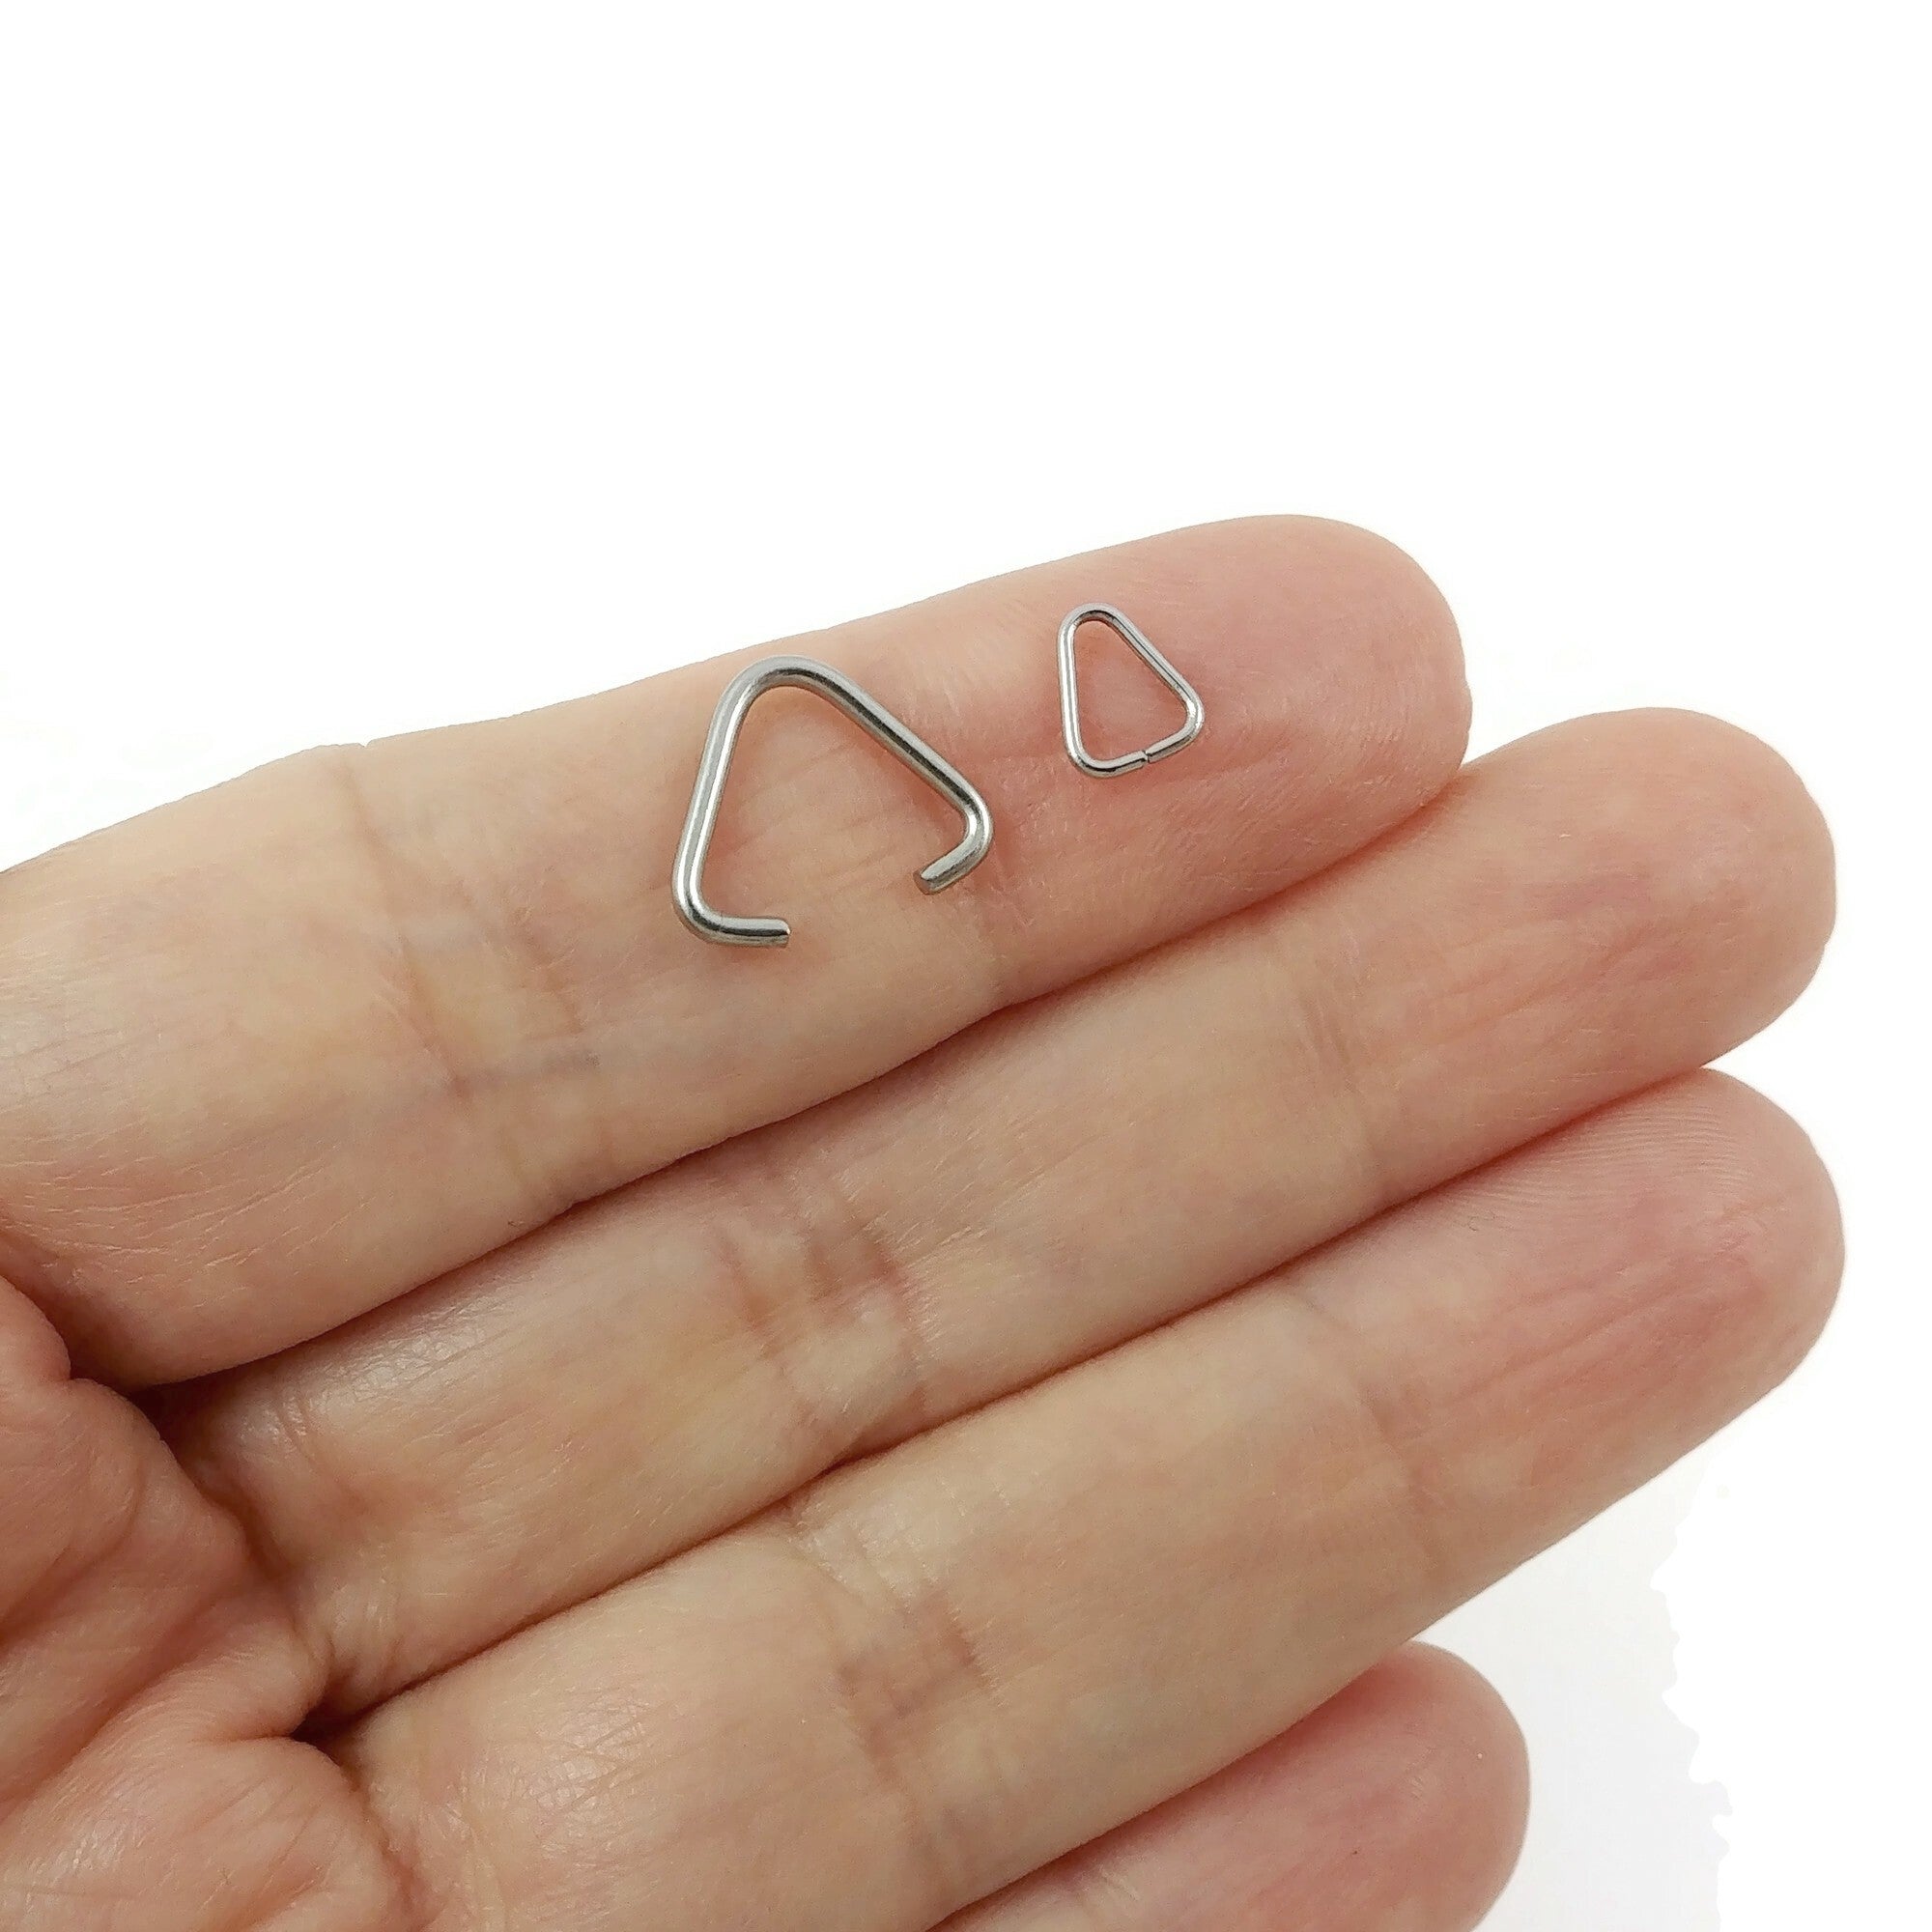 Stainless steel triangle jump rings, Pinch bails jewelry findings